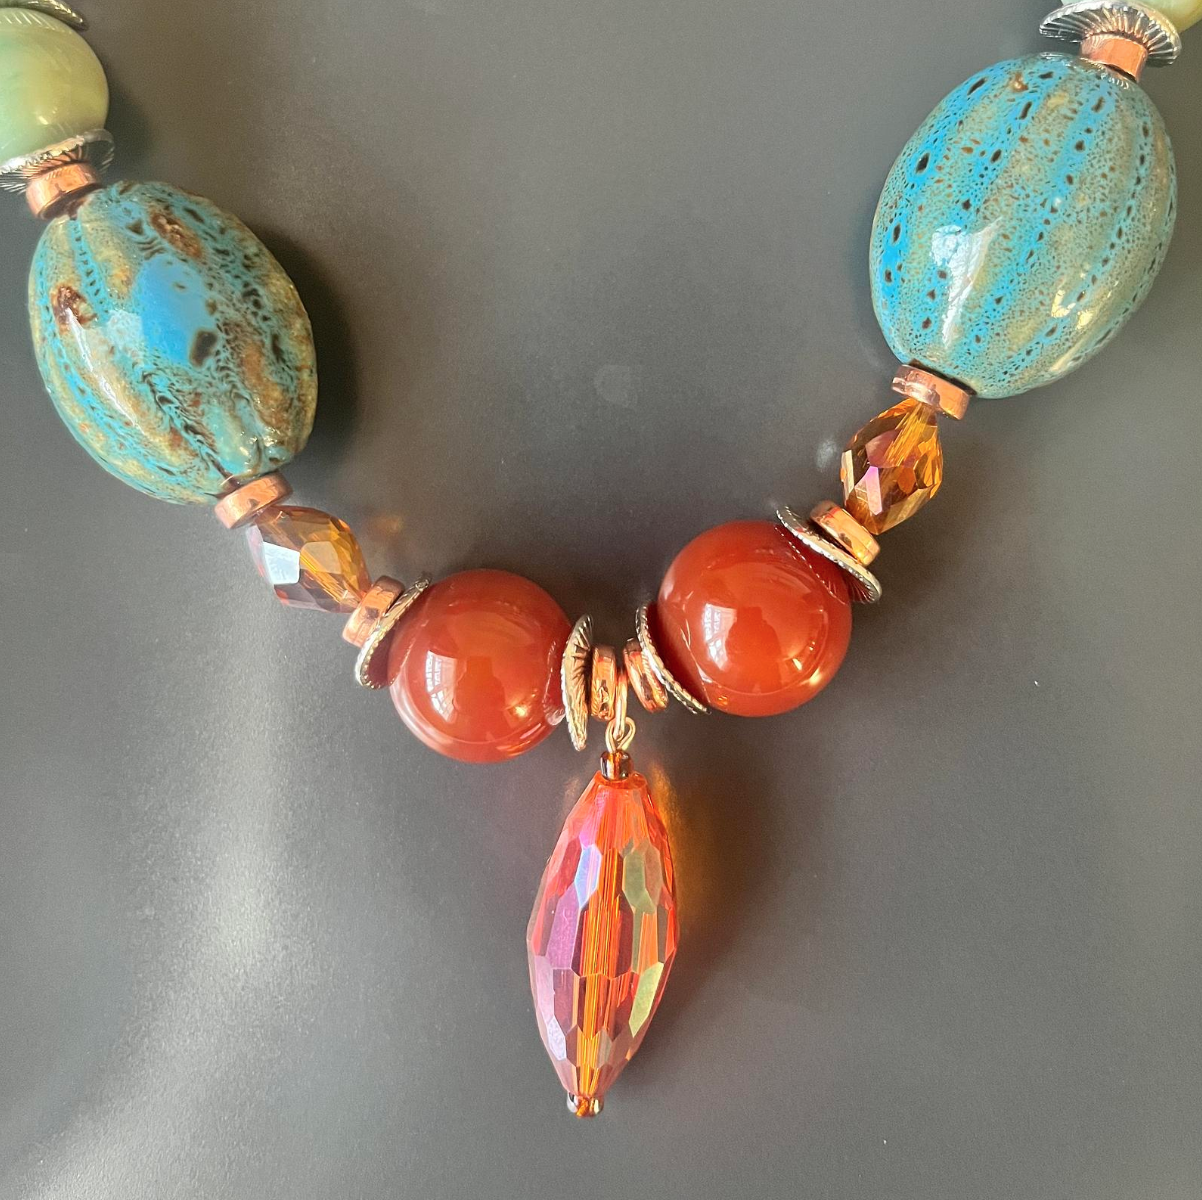 African Shop Near Me - Beaded Gem Necklace Handmade Fashion Necklace